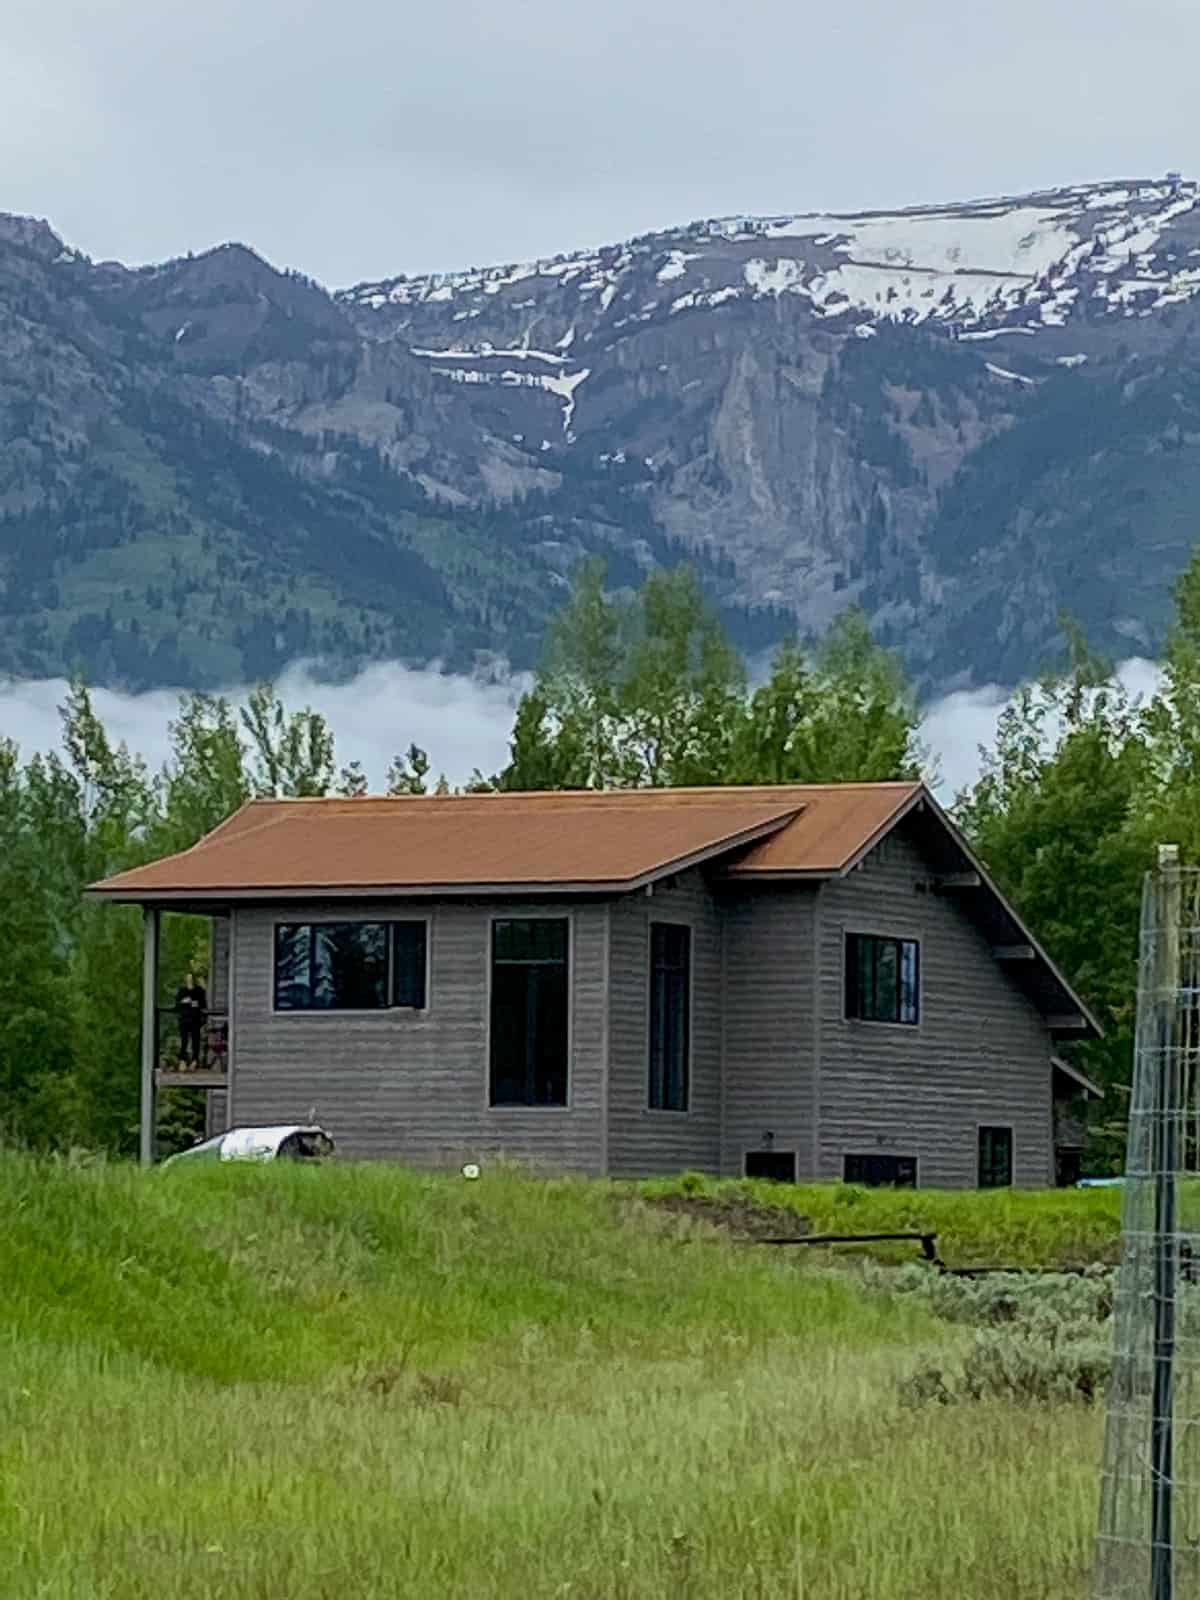 Our airbnb with the mountains in the background.